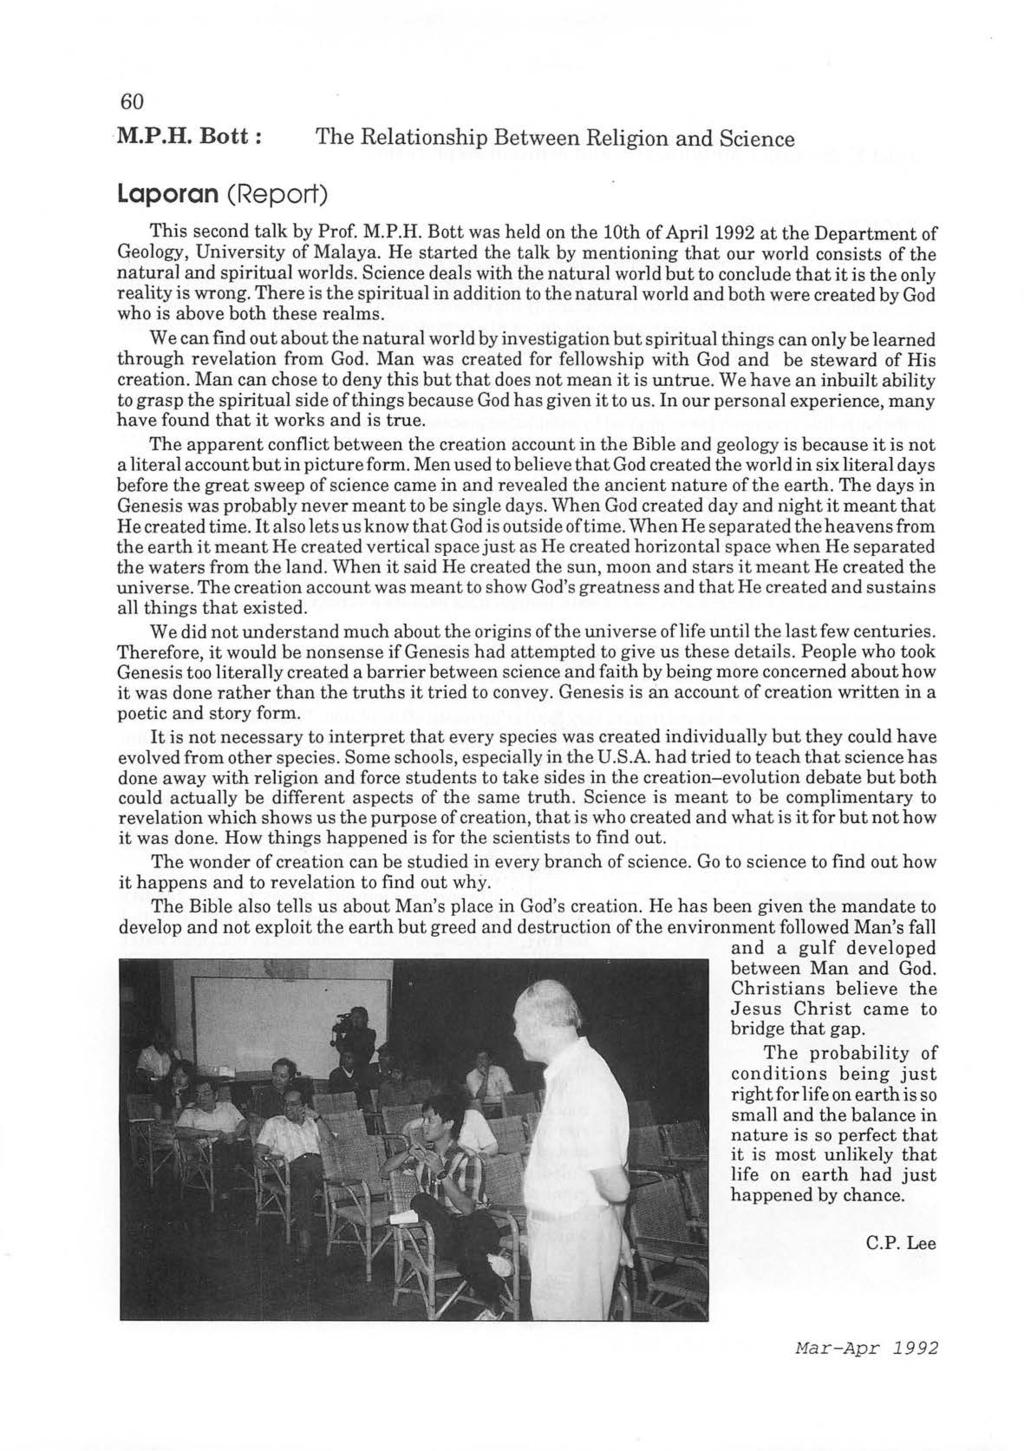 60 M.P.H. Bott : The Relationship Between Religion and Science Laporan (Report) This second talk by Prof. M.P.H. Bott was held on the 10th of April 1992 at the Department of Geology, University of Malaya.